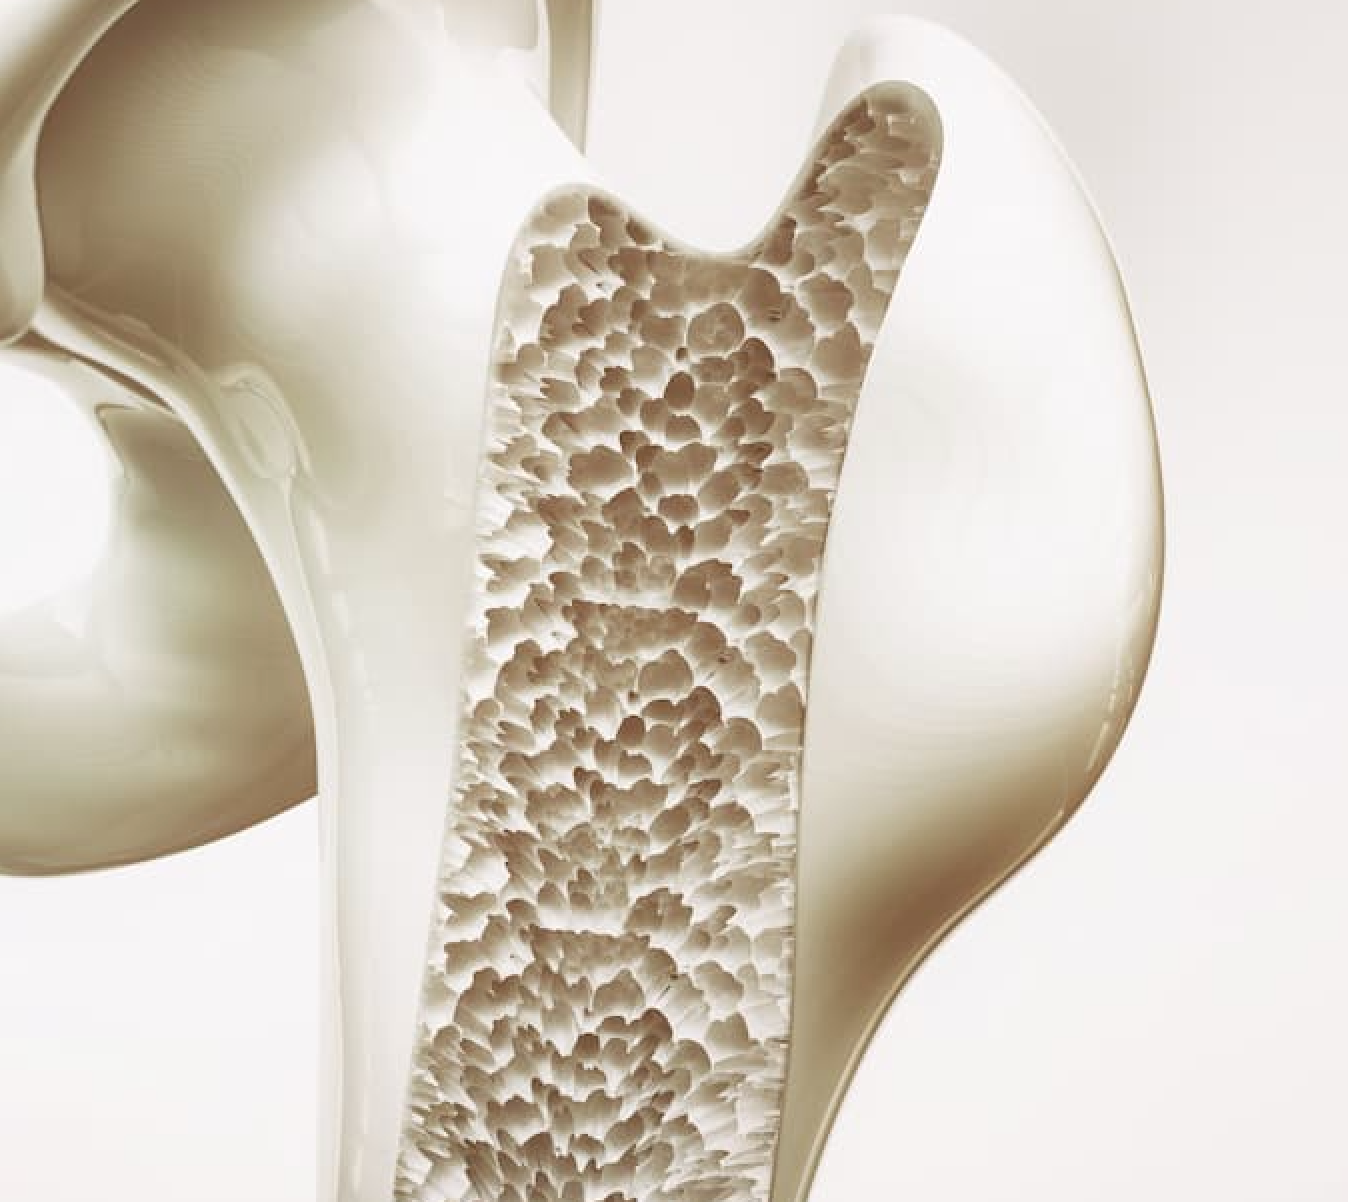 Lumbar Bone Mineral Density Negatively Linked to Hyperuricemia in Obese Males